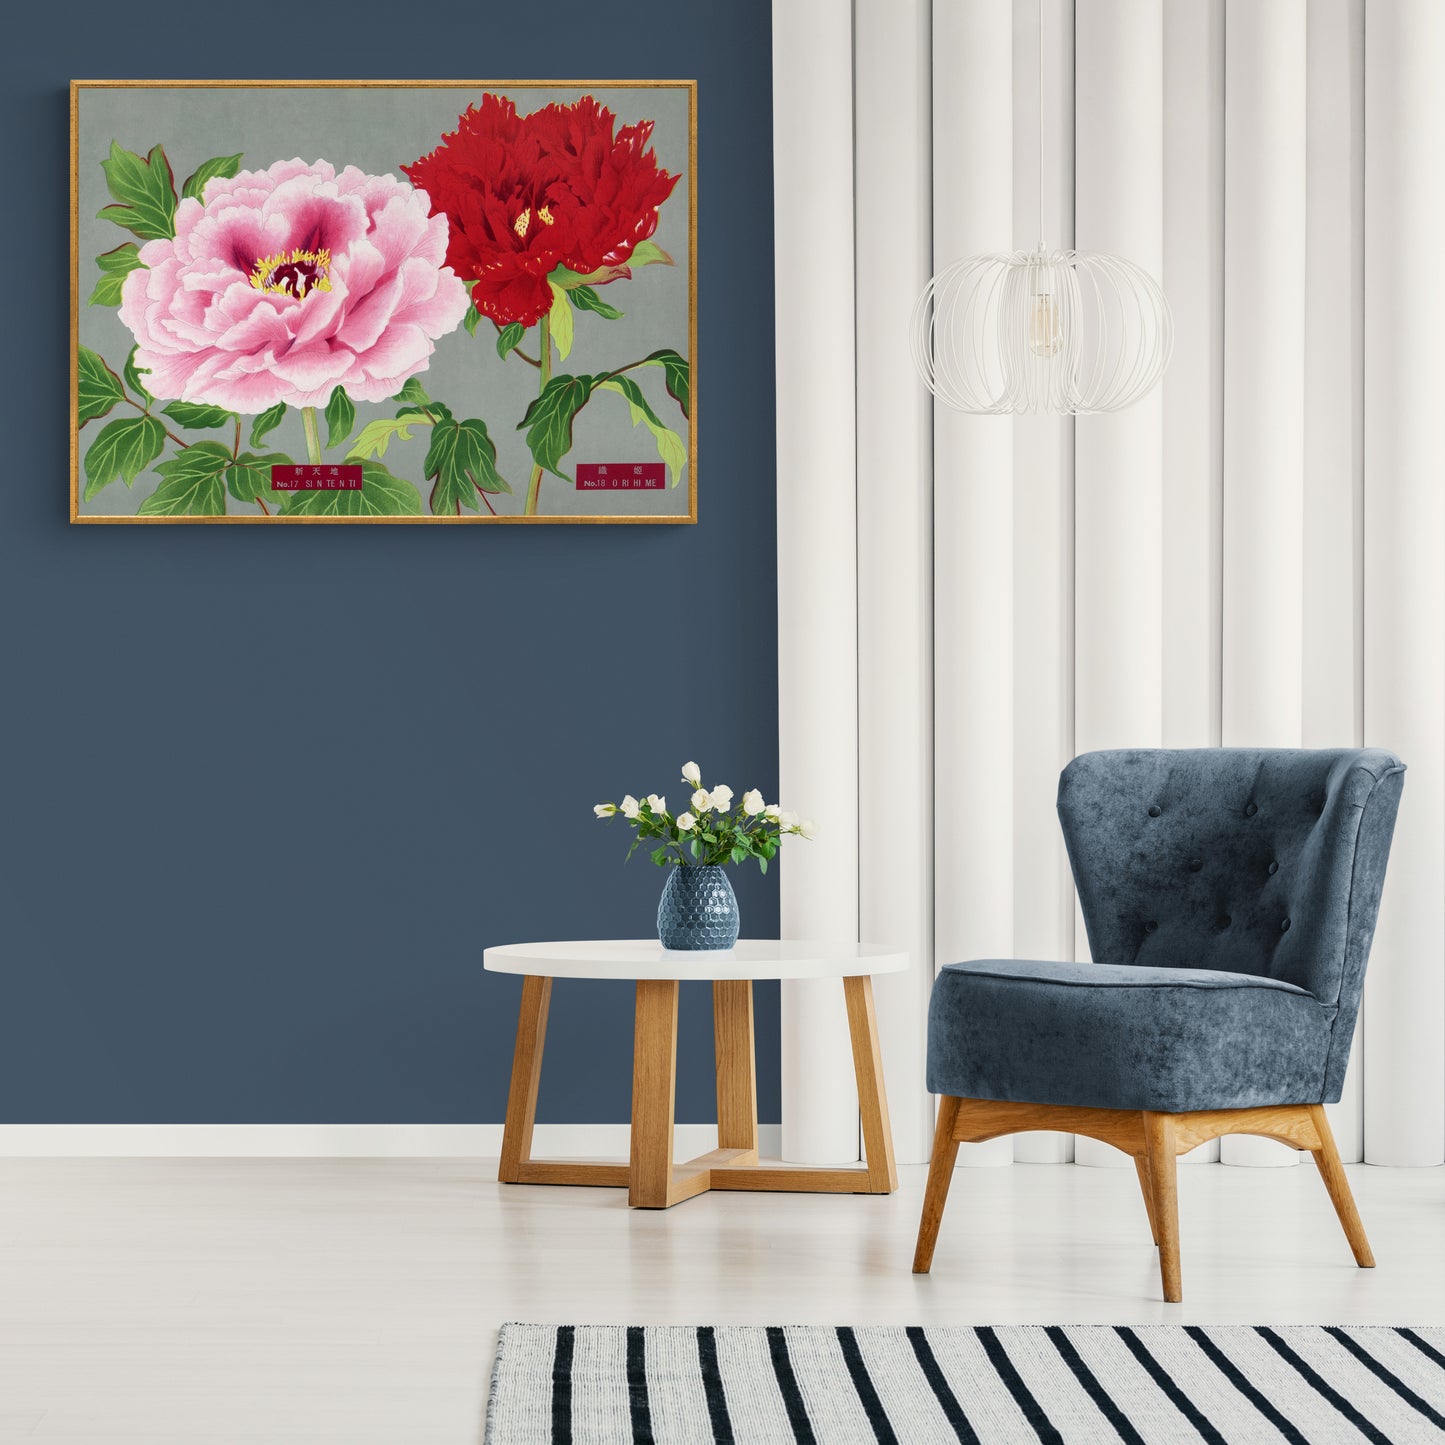 The Picture Book Of Peonies - Pink & Red Peonies